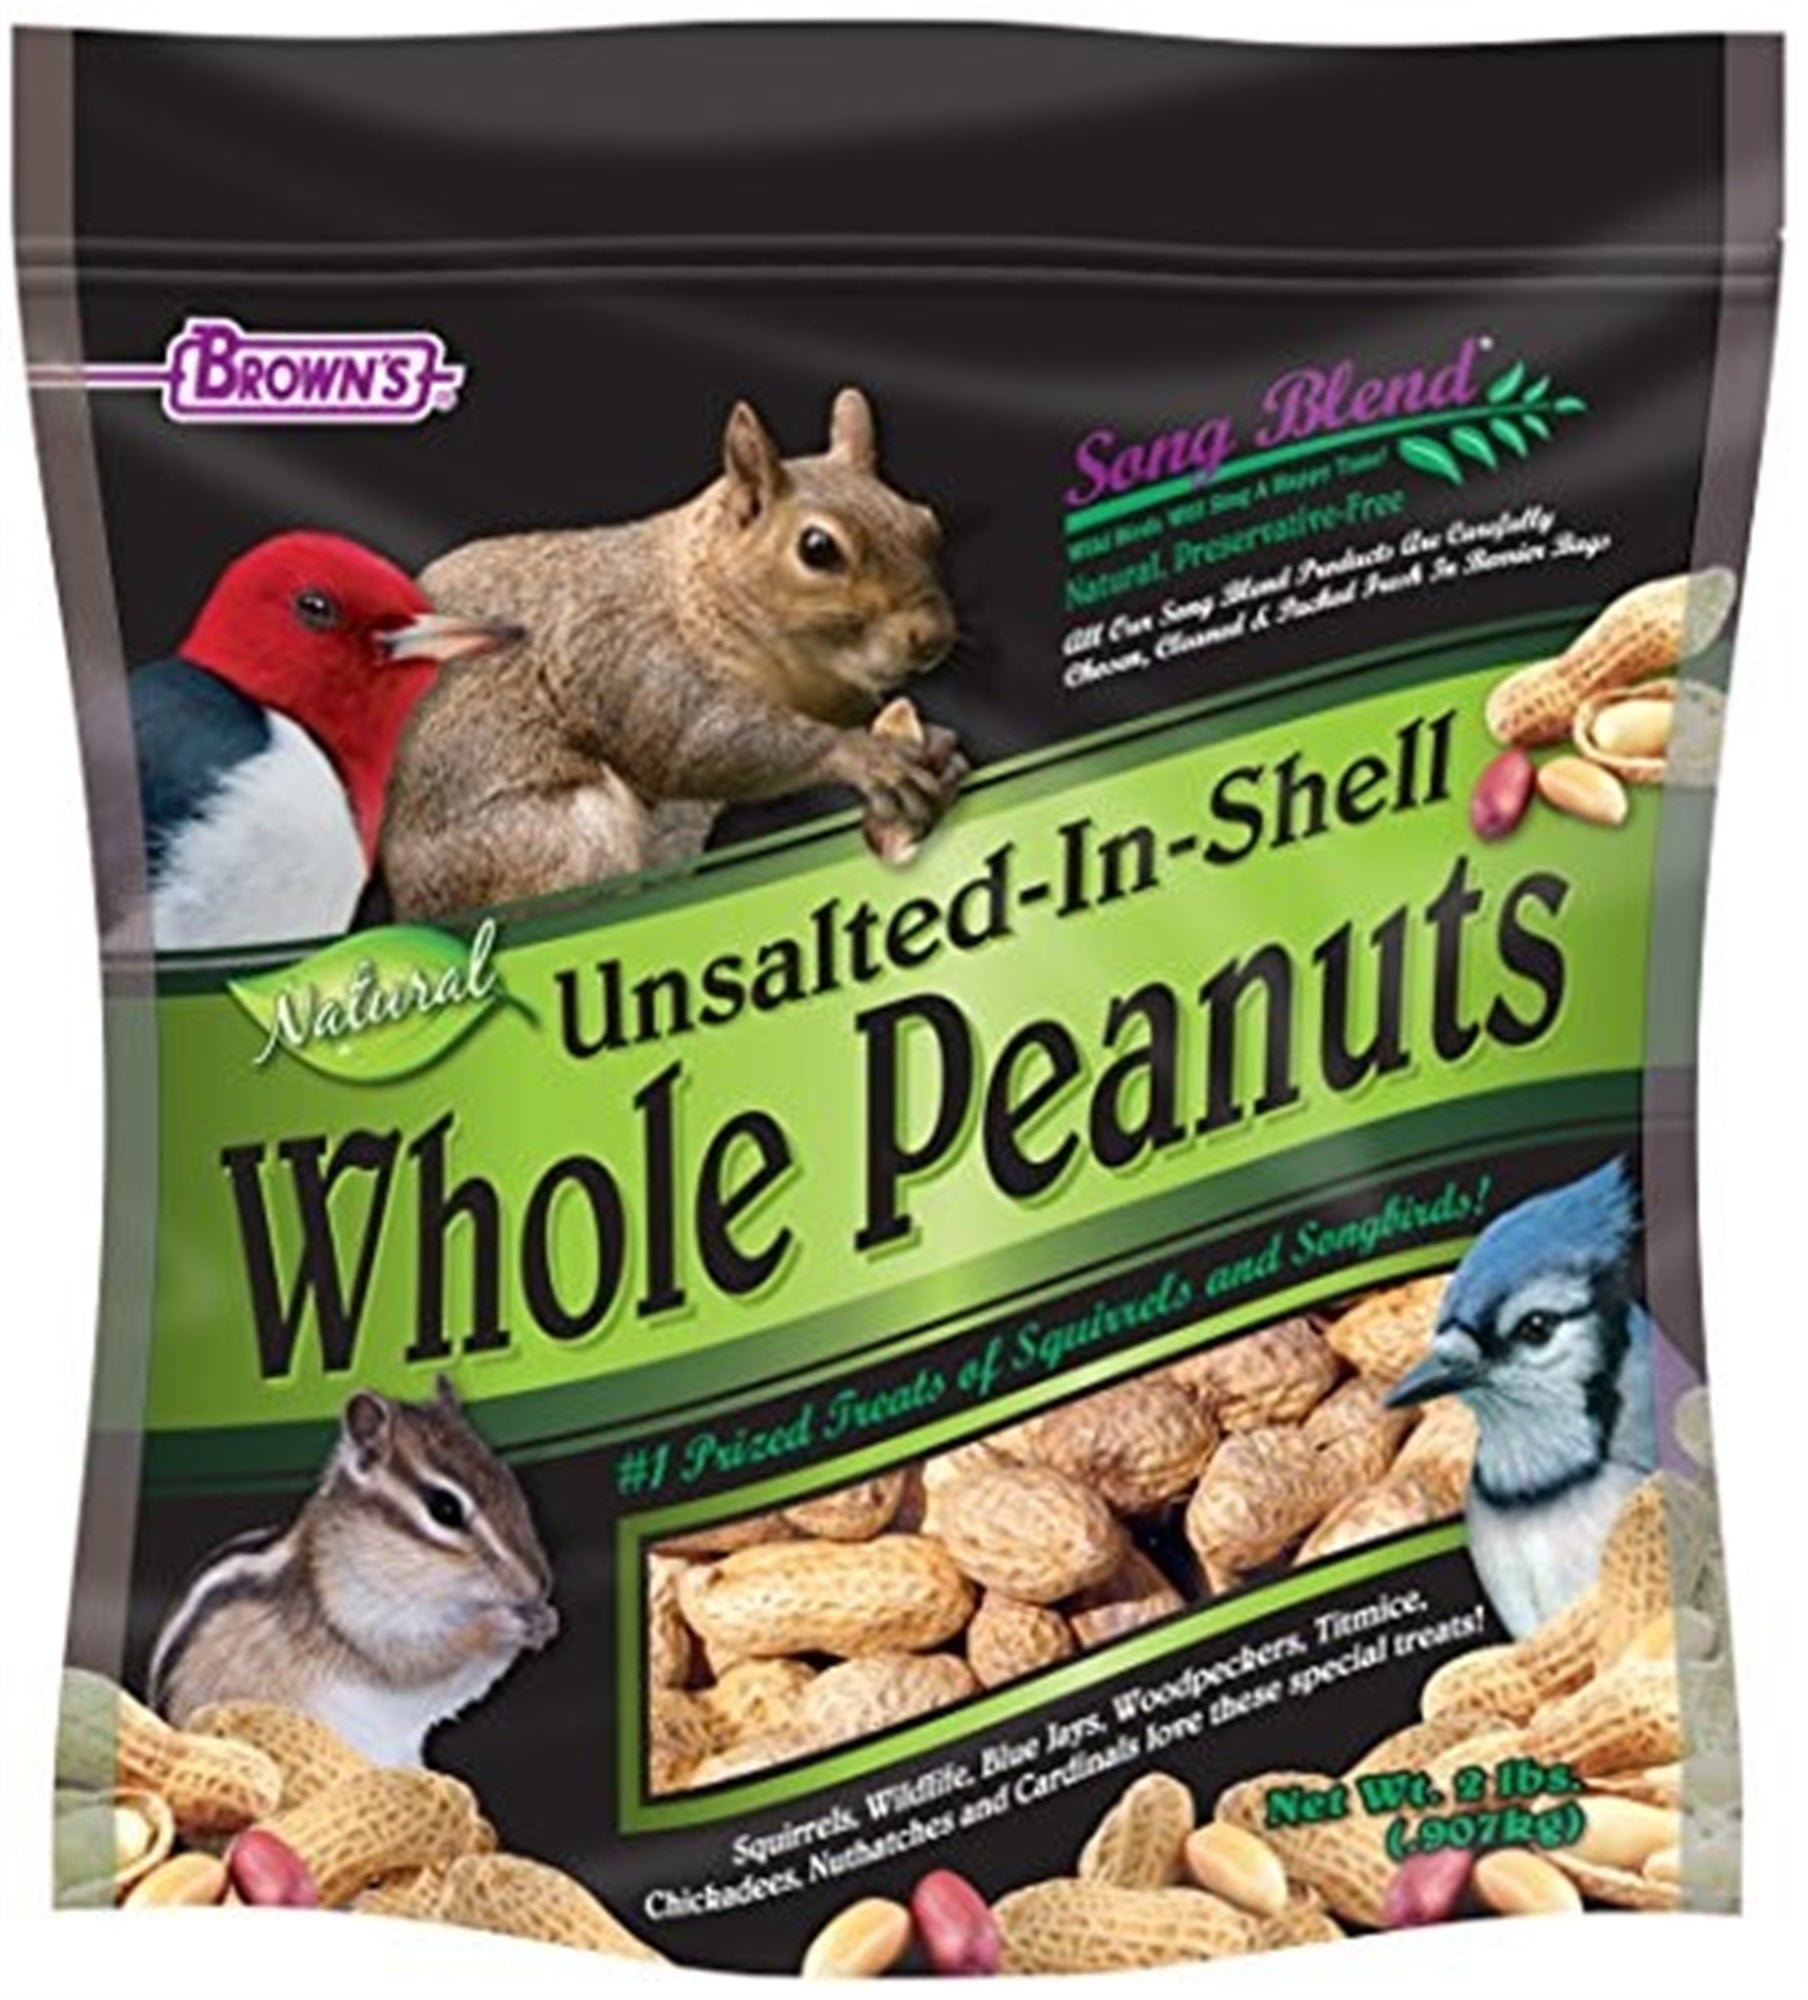 F.M.Brown's Song Blend Unsalted In-Shell Whole Peanuts, 2 lb